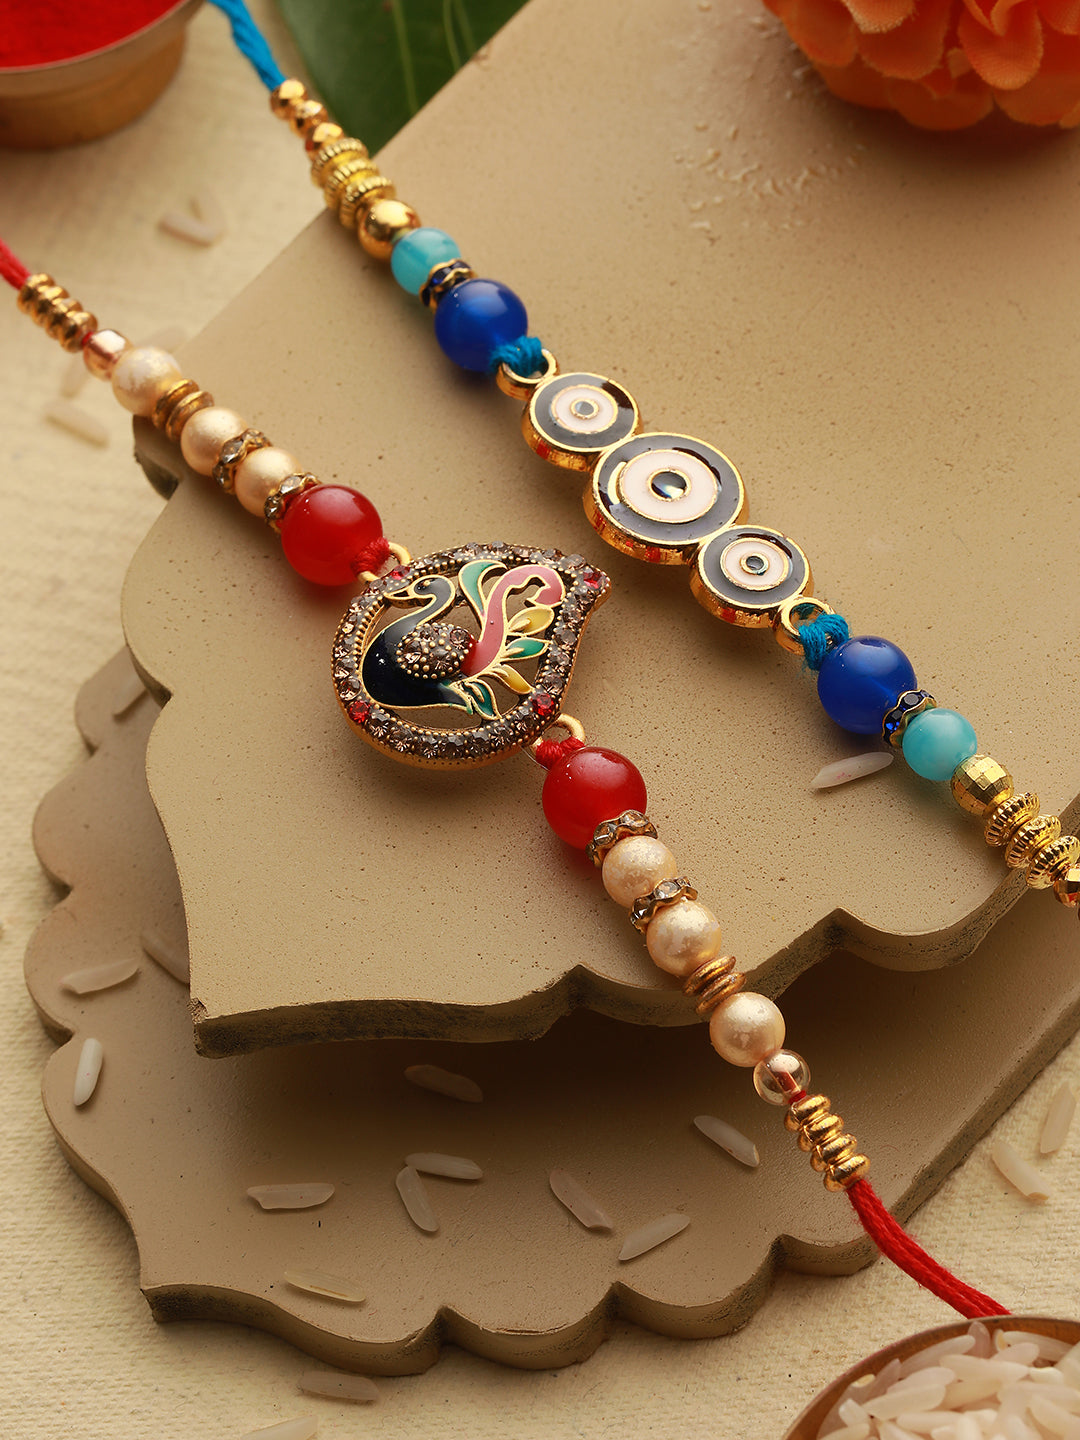 Set of 2 Evil Eye nd Peacock Rakhi with Roli Chawal with 10 gram Shri Laxmi round 999 Round Silver Coin